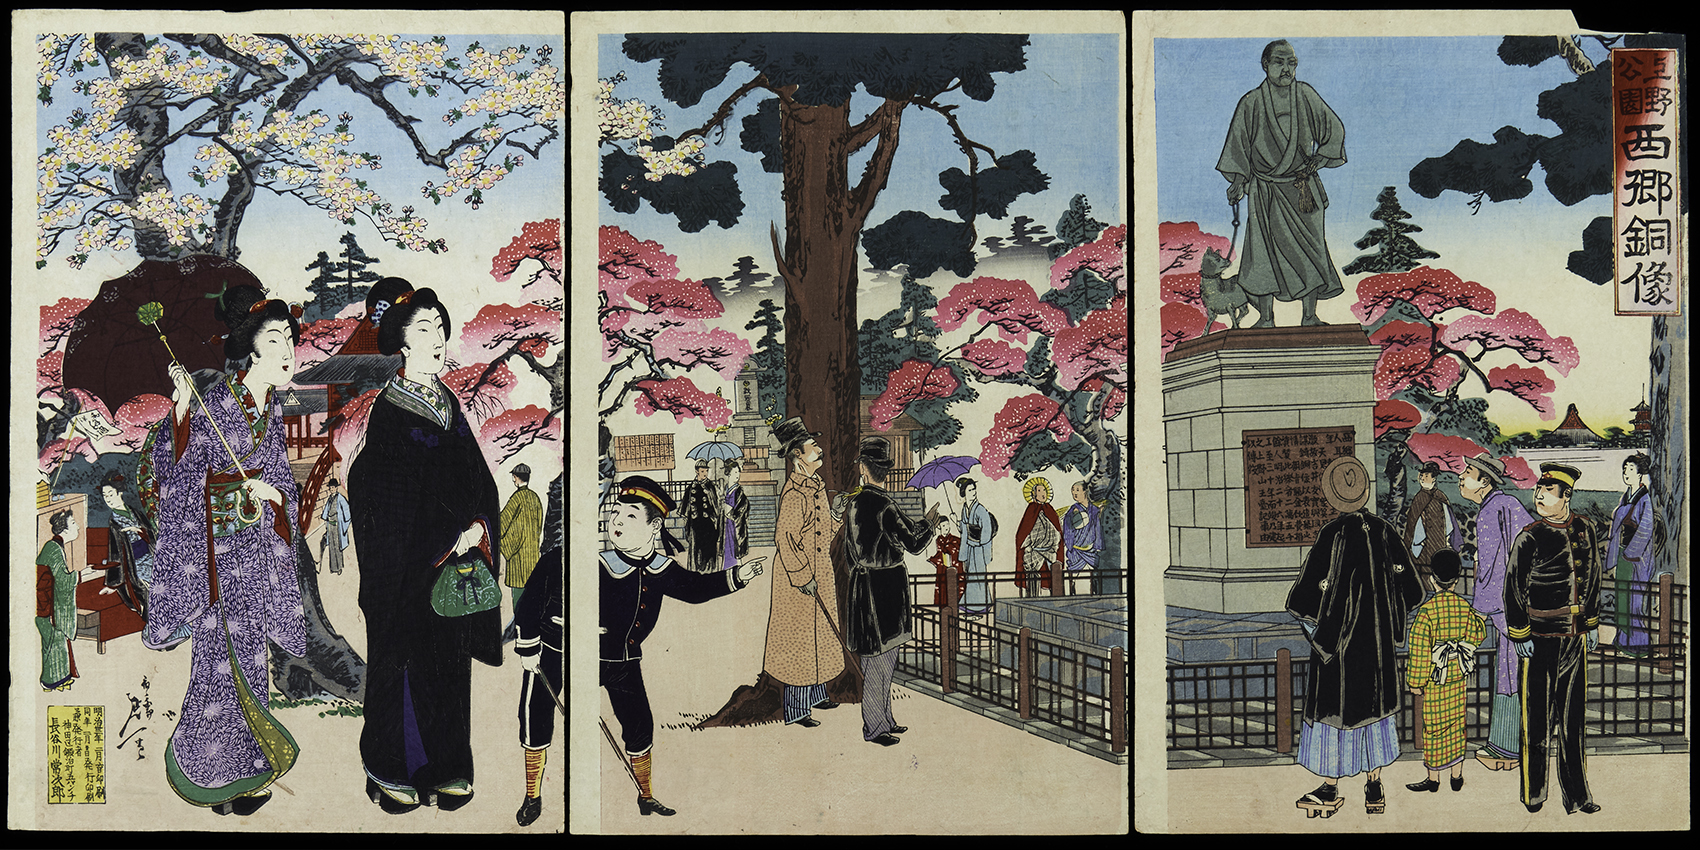 Across a triptych woodblock print, groups of people stroll through a park in Japan